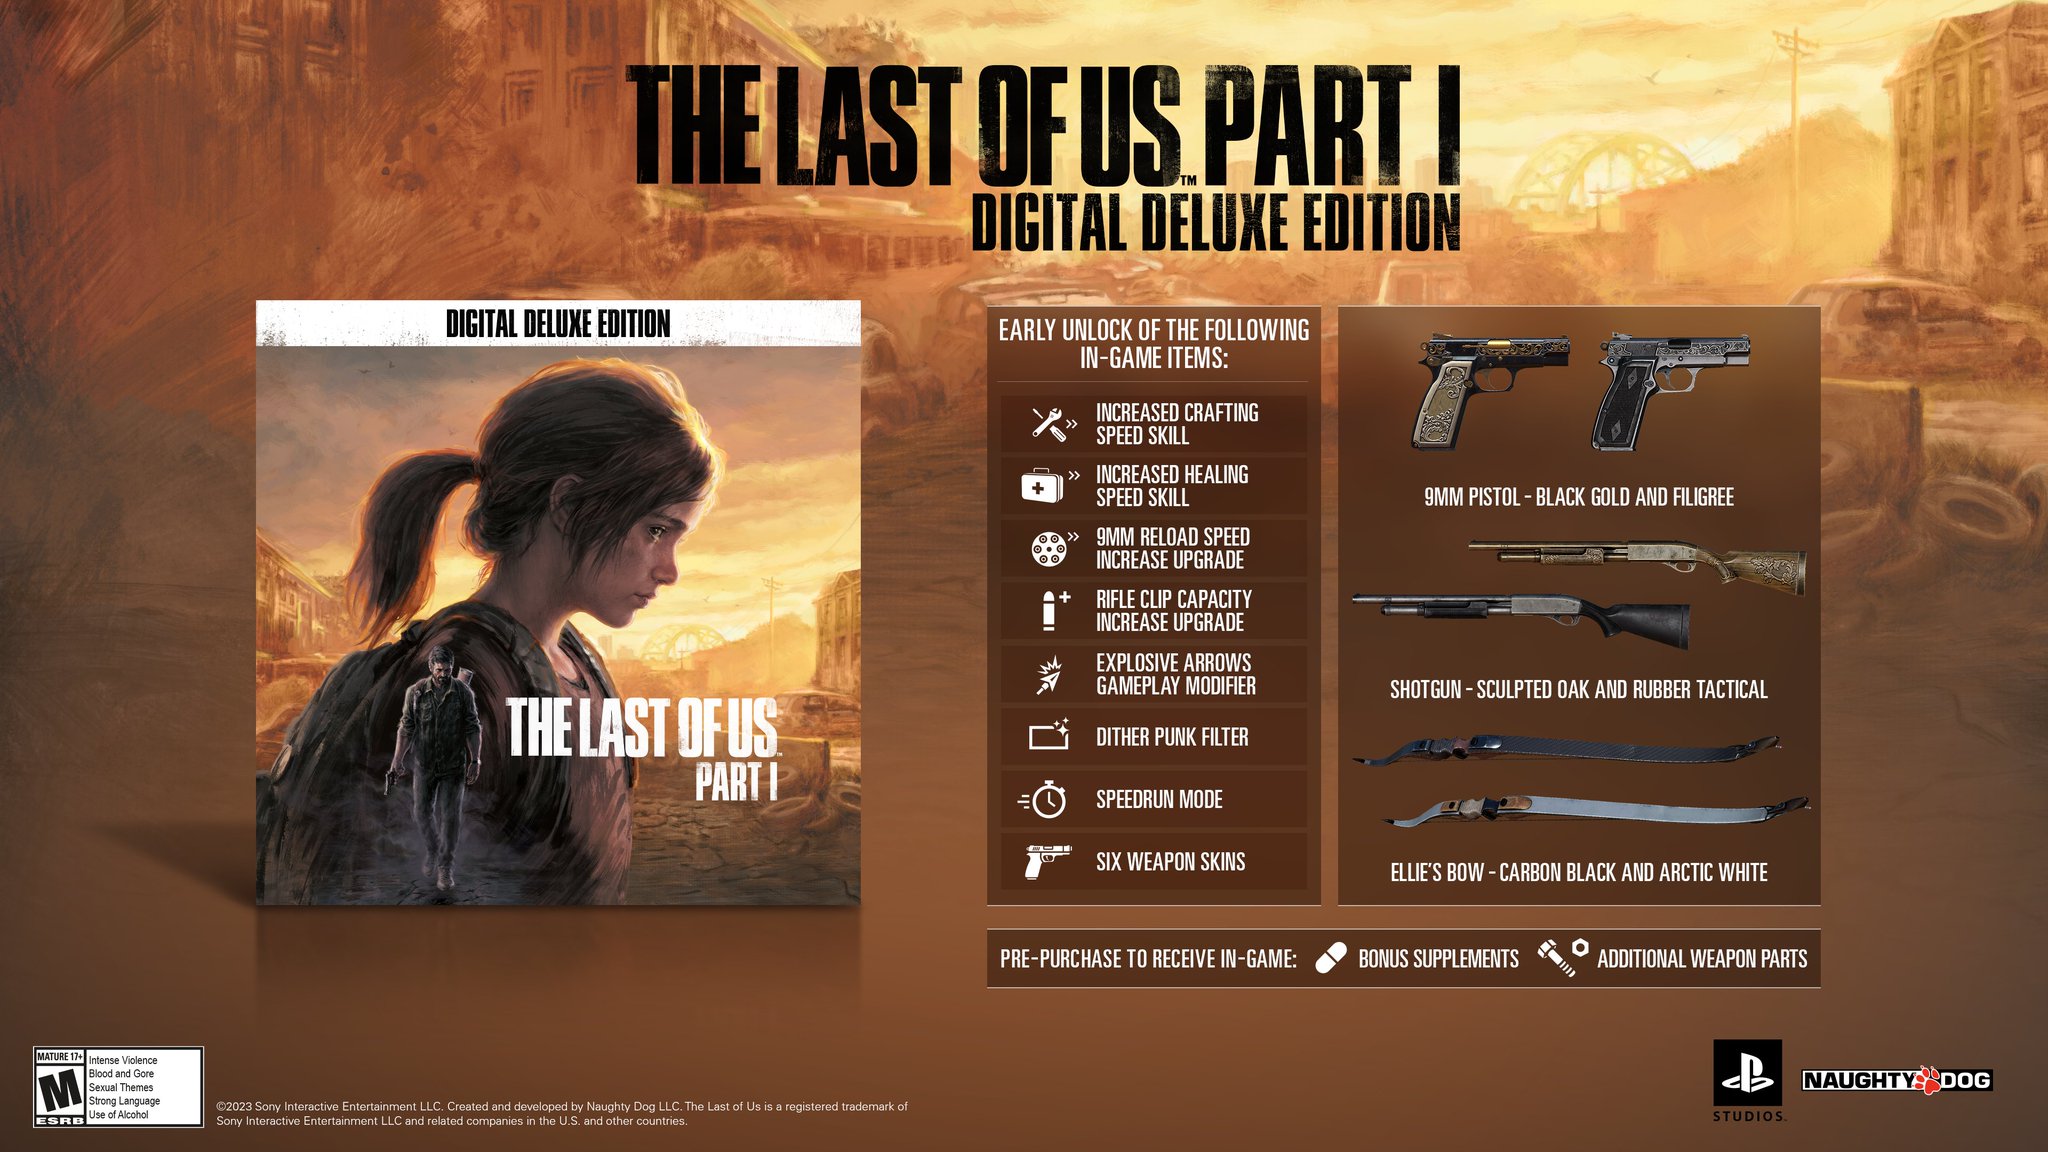 The Last of Us Part 2 PC Release Date